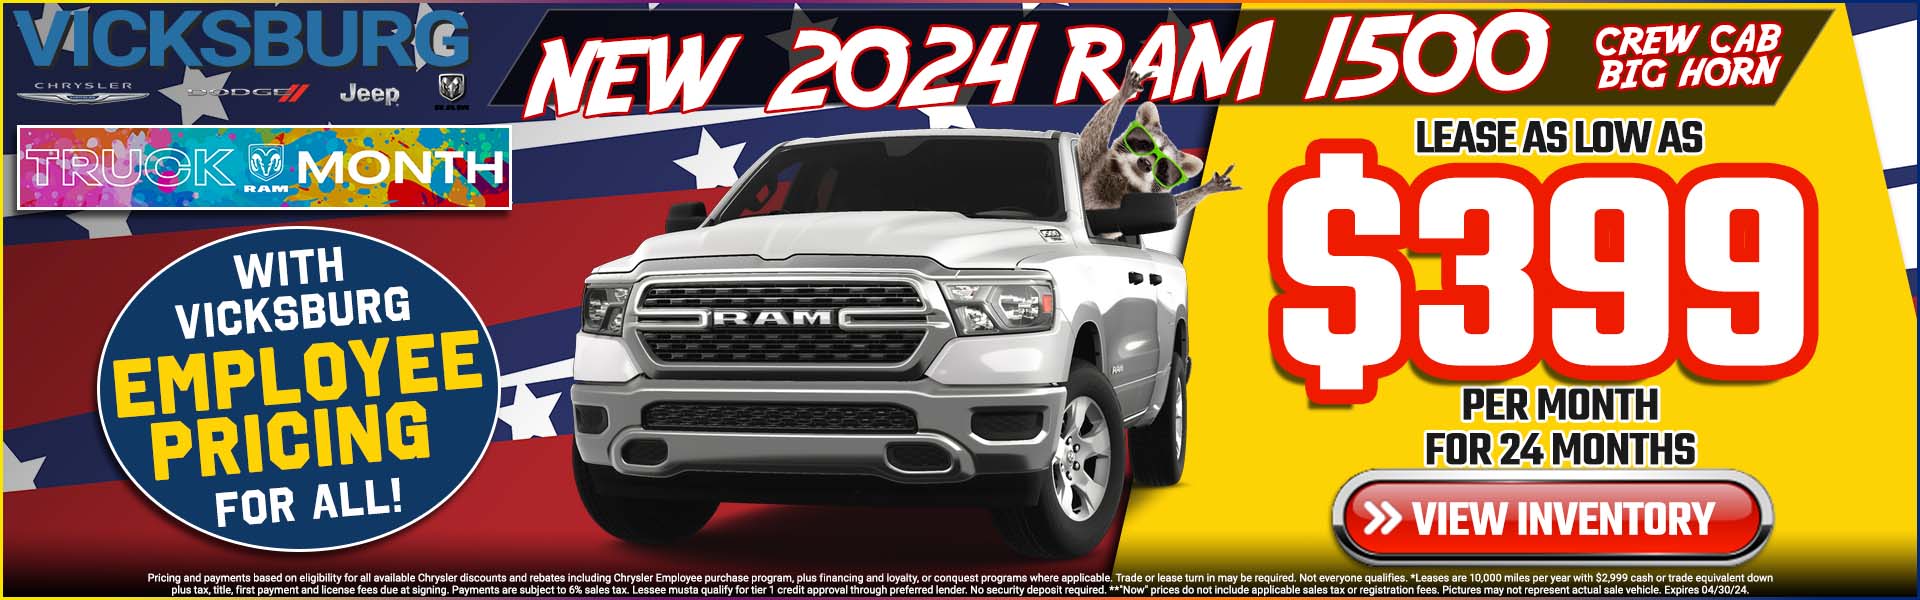  2024 Ram 1500 Crew Cab Big Horn $399 per month for 24 month